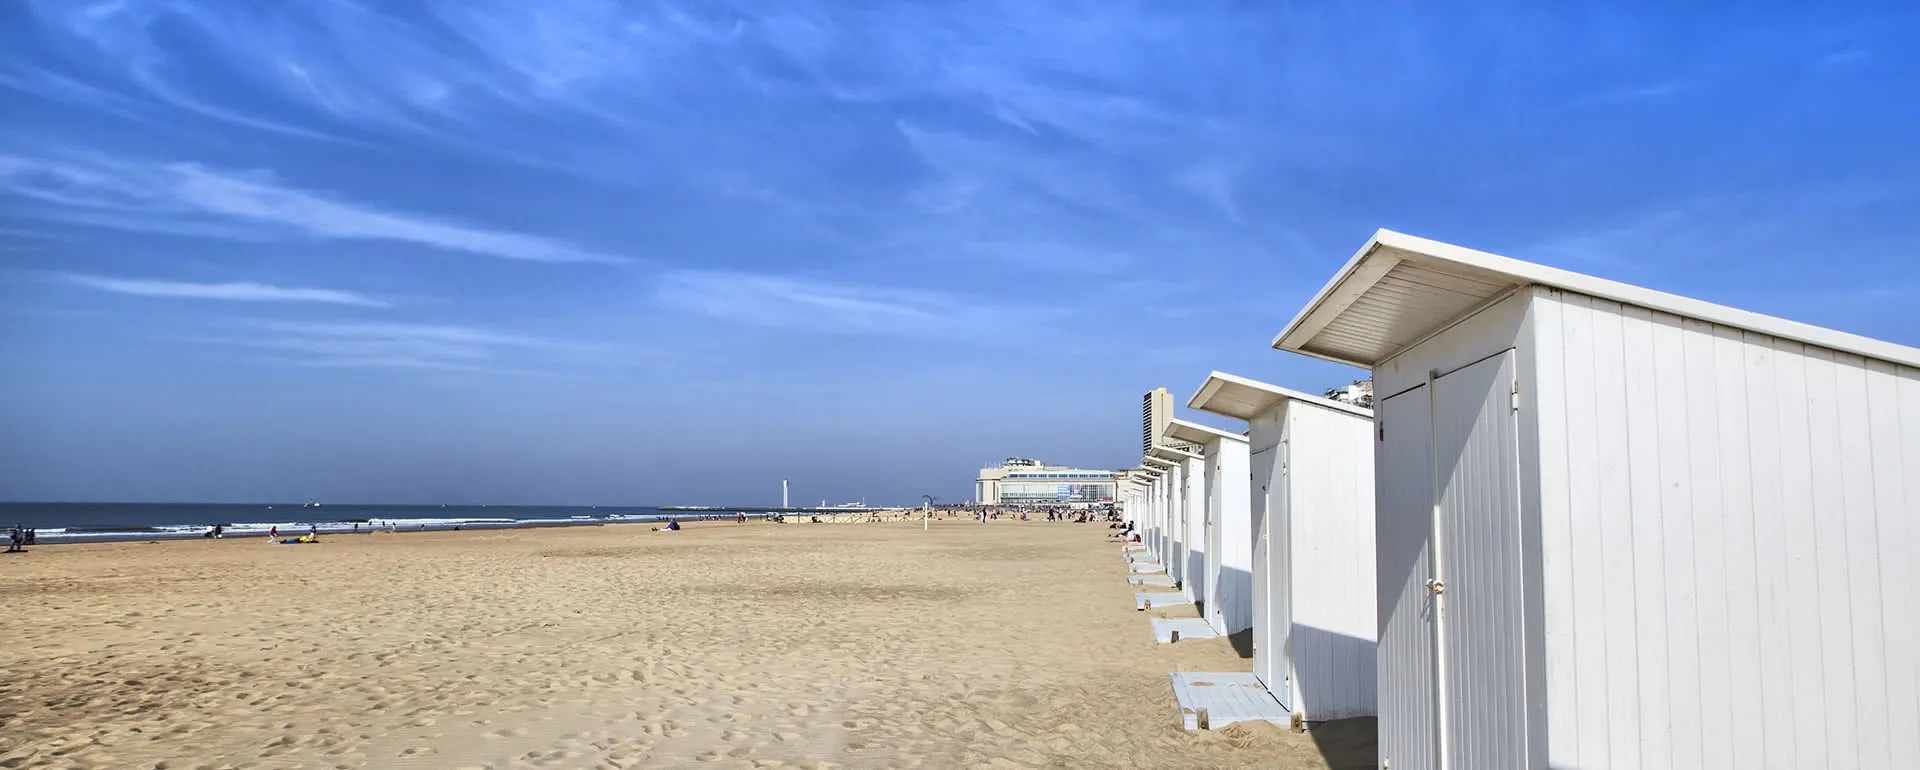 Ostende - the destination for company trips